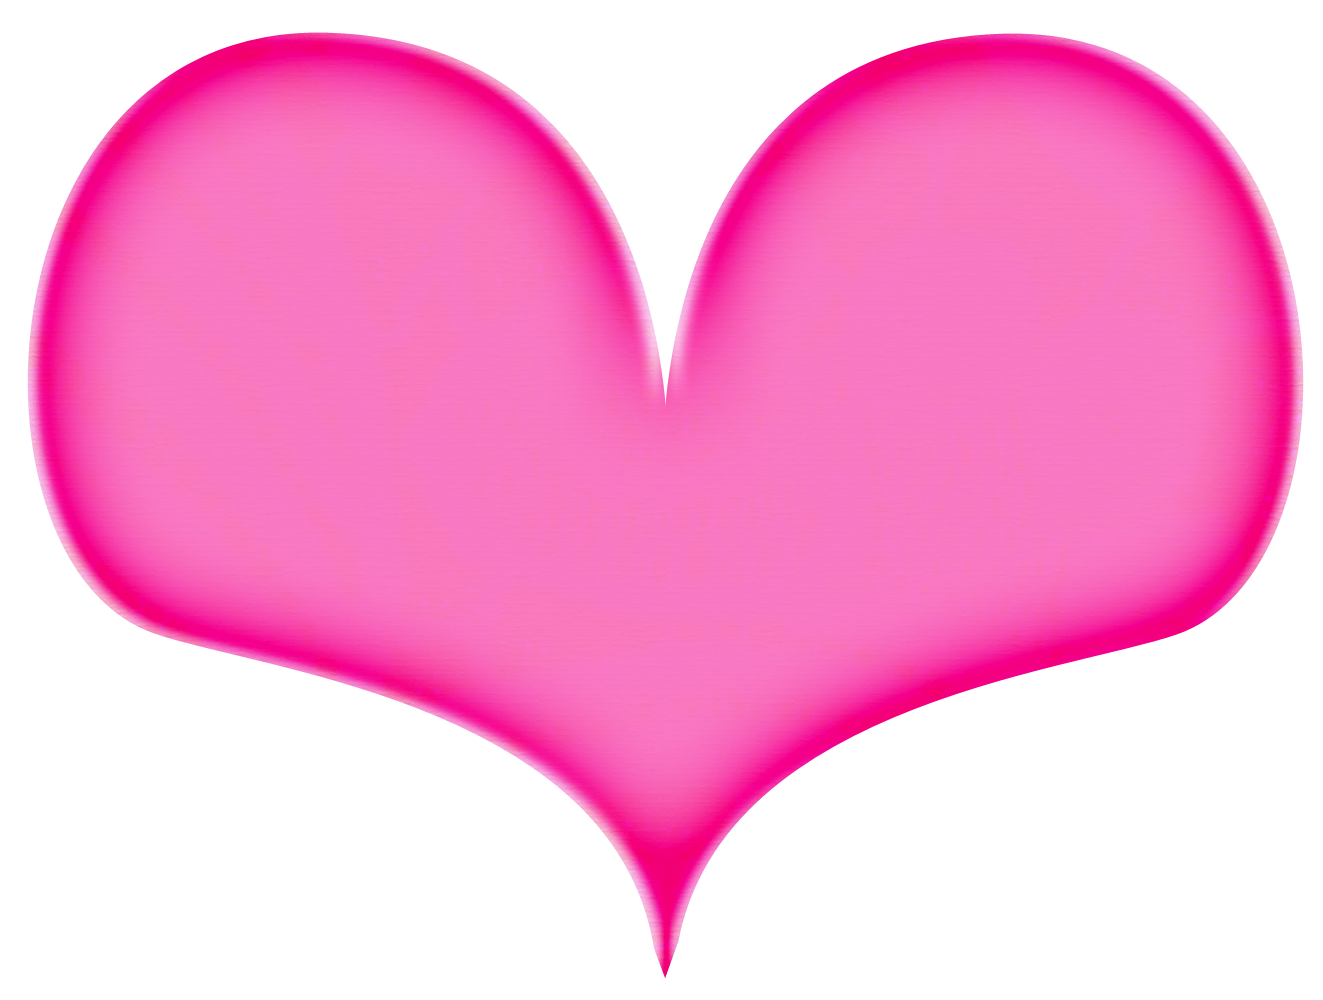 Light Pink Heart Clipart | Clipart Panda - Free Clipart Images